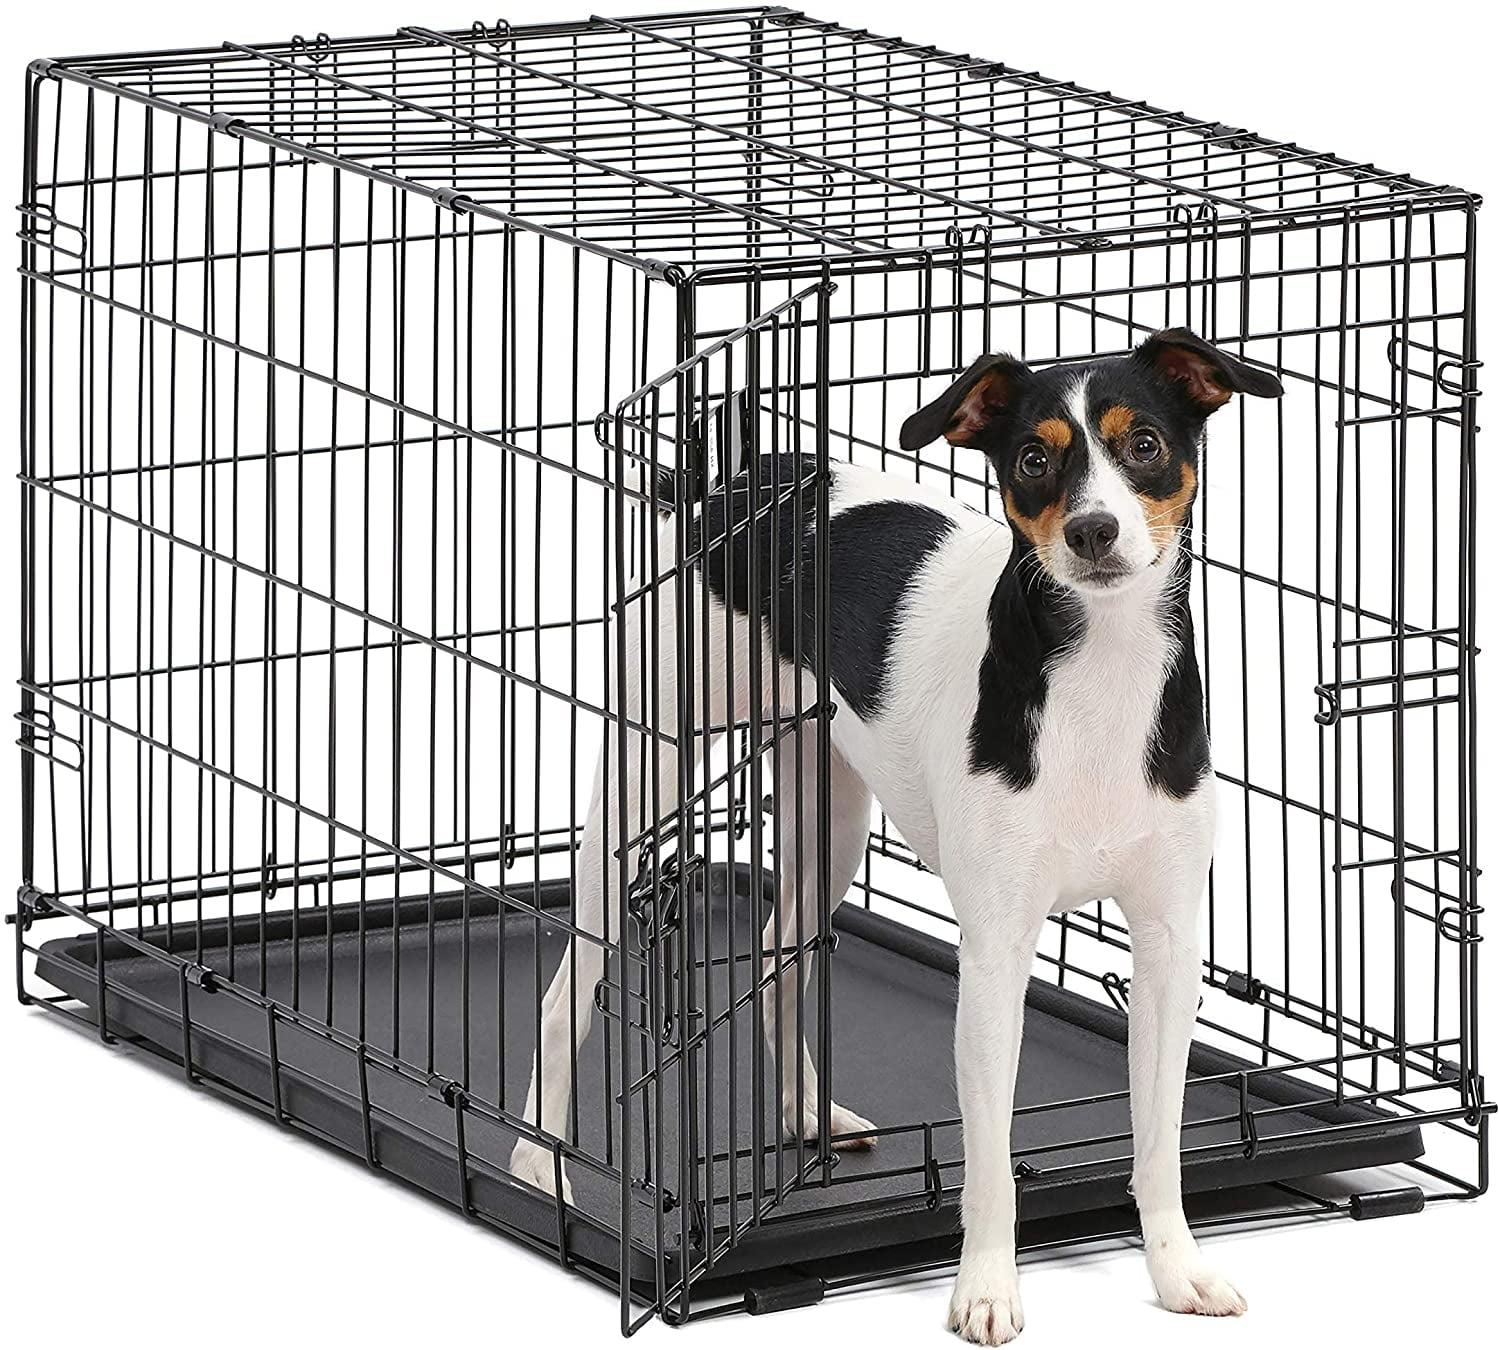 MidWest Homes for Pets Ovation Single Door Dog Crate, 31.25-Inch by Mi